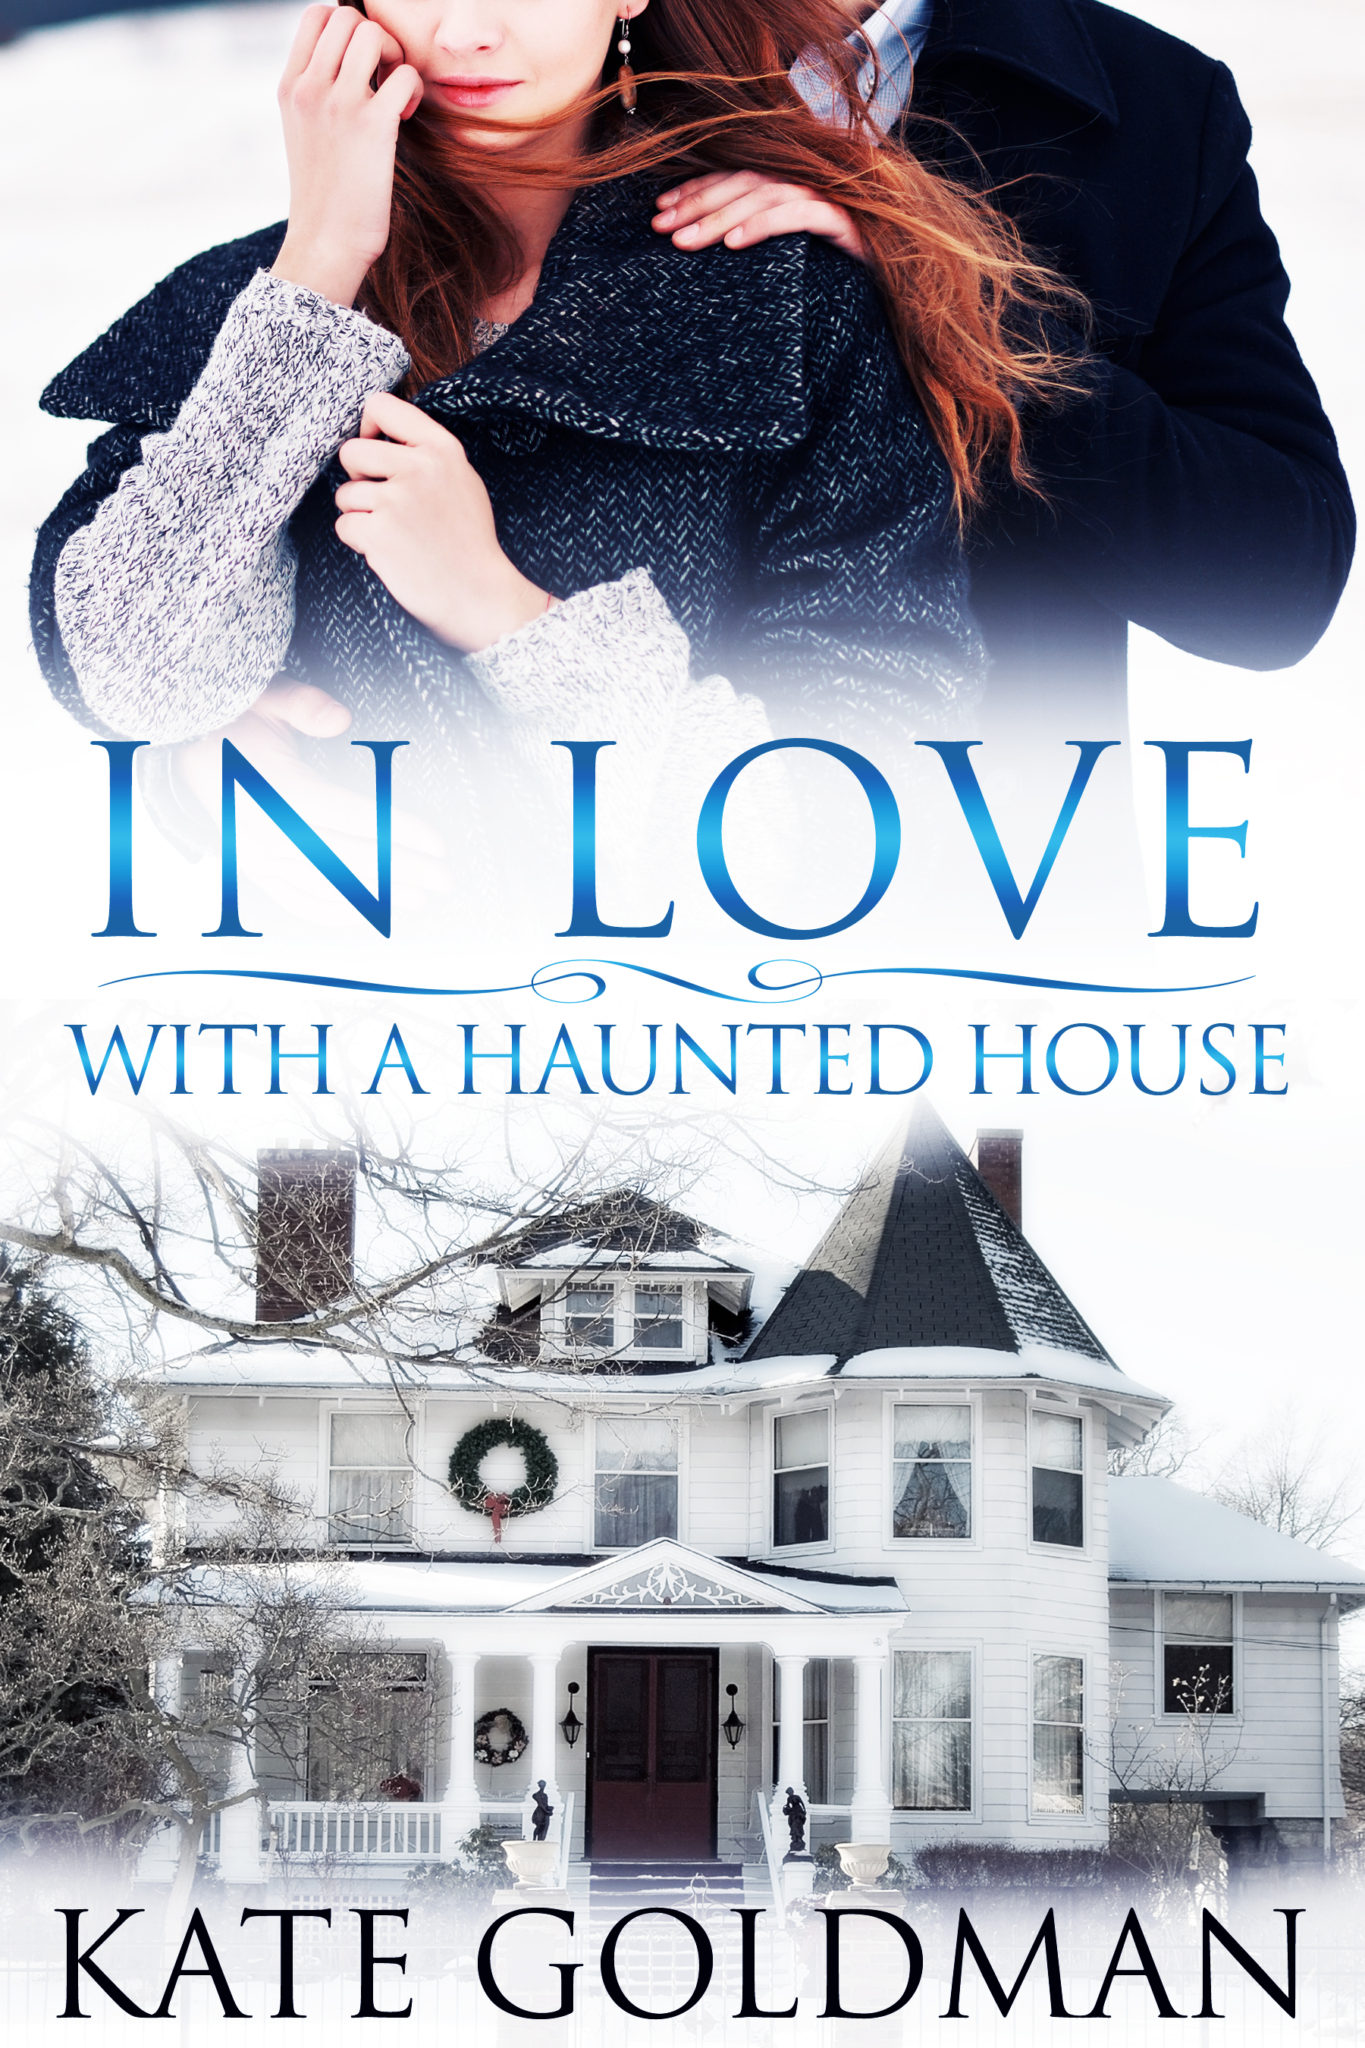 In Love With a Haunted House by Kate Goldman